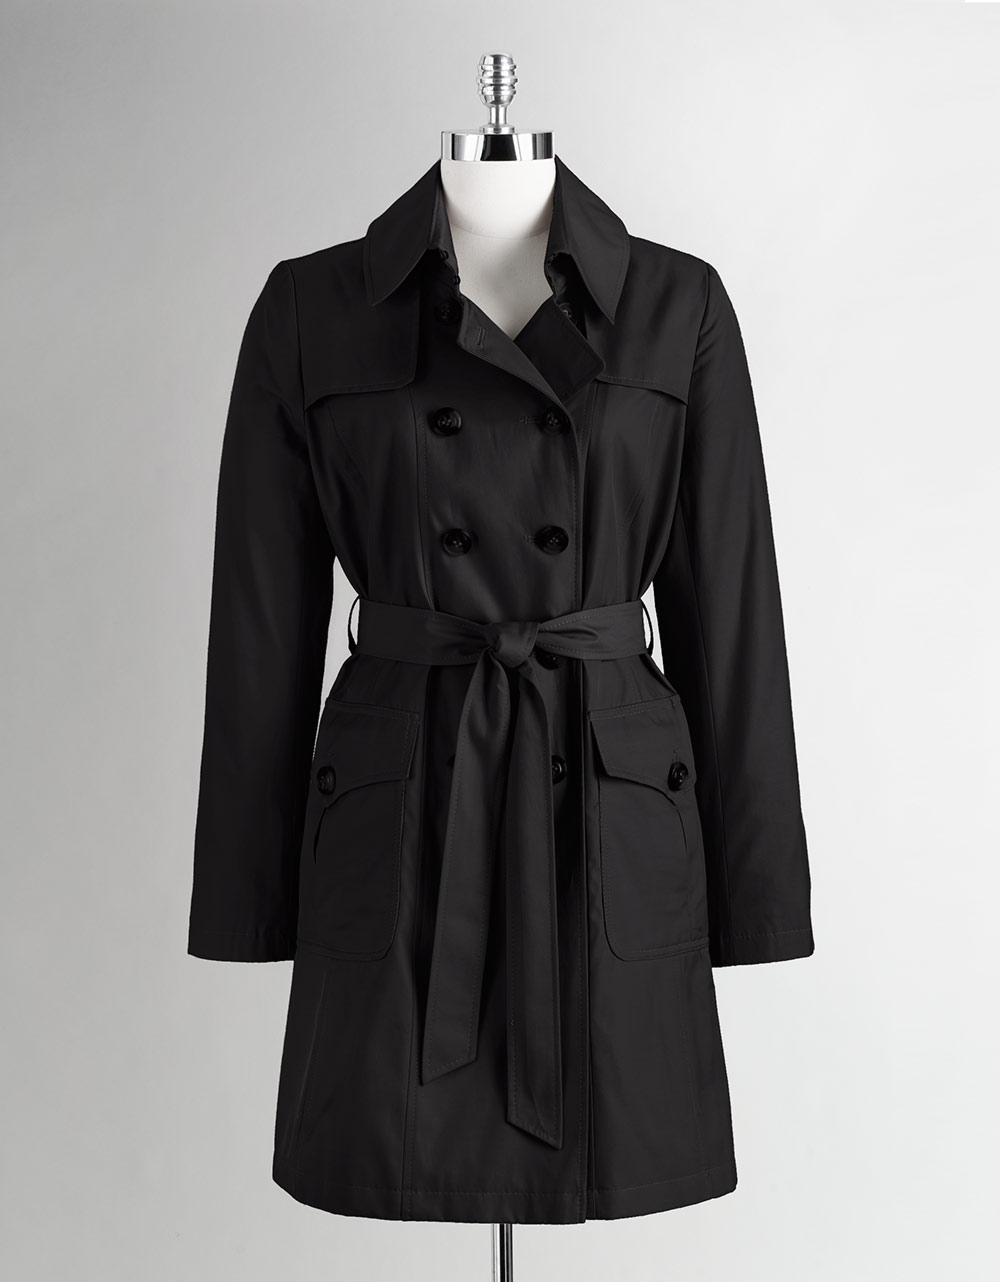 Dkny Petites Belted Trench Coat in Black | Lyst